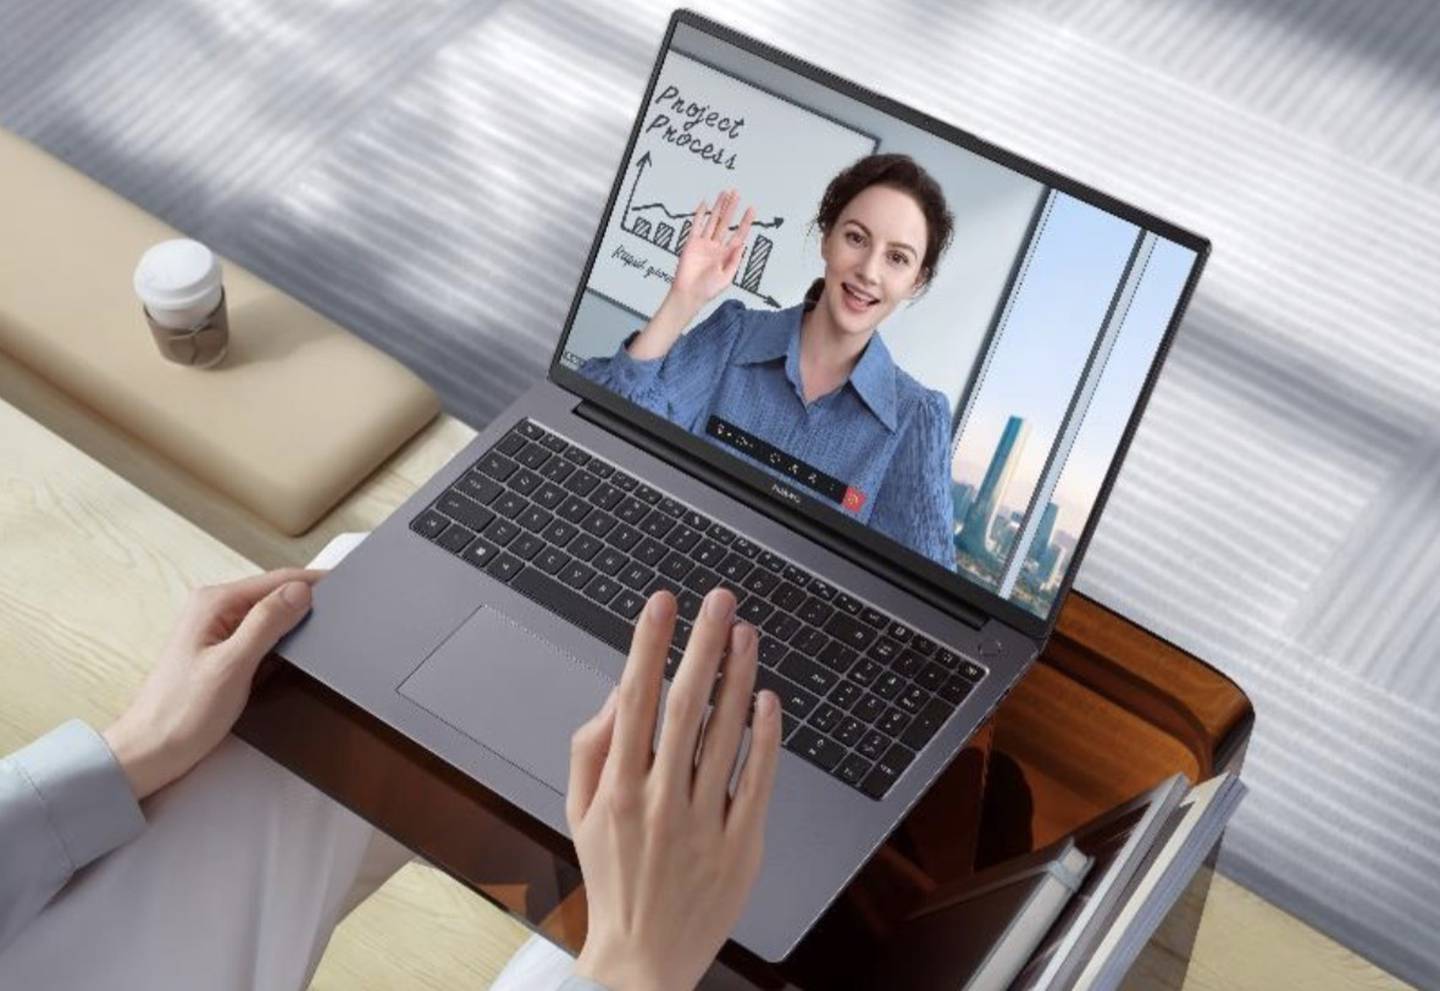 MateBook 16 is a lightweight laptop with high performance and good design.  For those professionals looking for connectivity, speed and efficiency in a team, ideal for hybrid work and to take your virtual meetings to the next level.